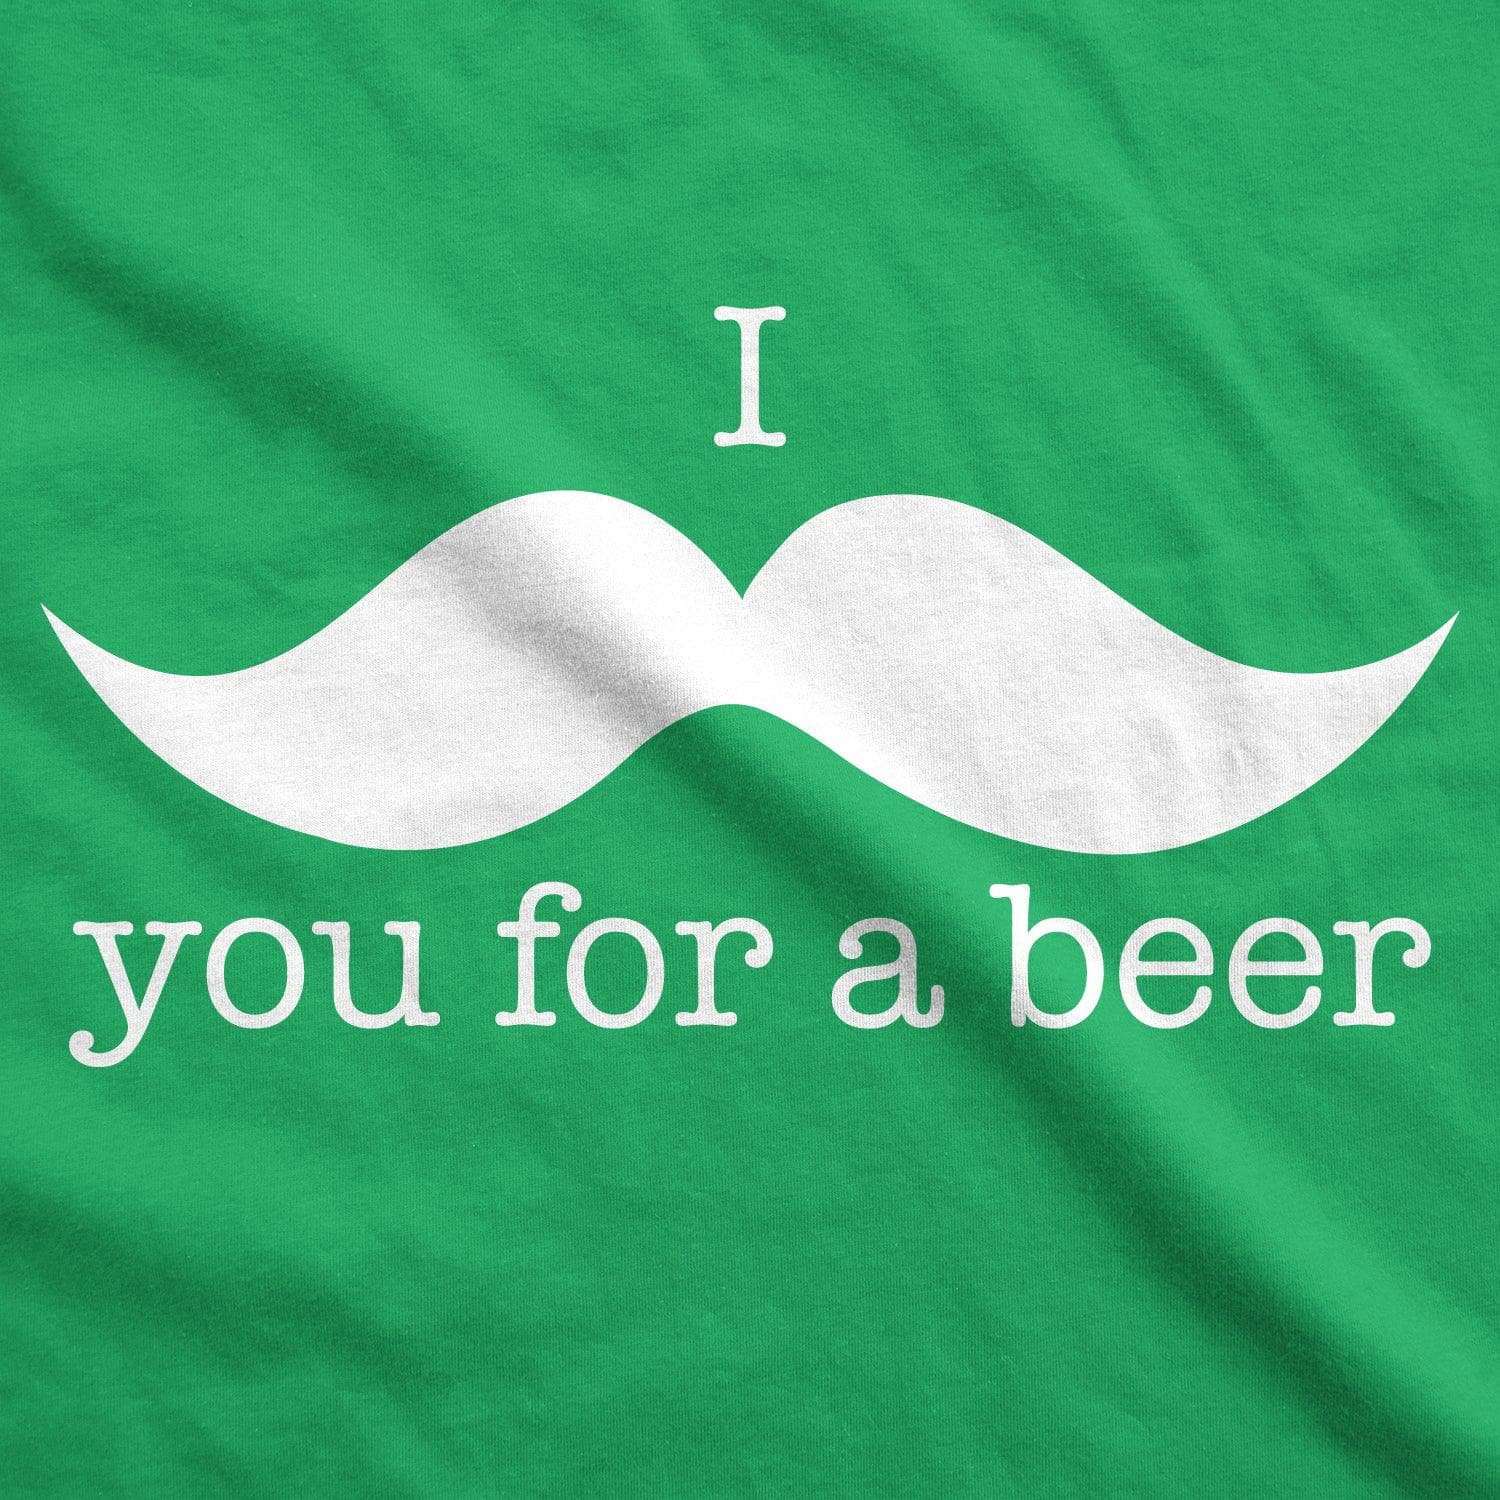 I Mustache You For A Beer Men's Tshirt  -  Crazy Dog T-Shirts